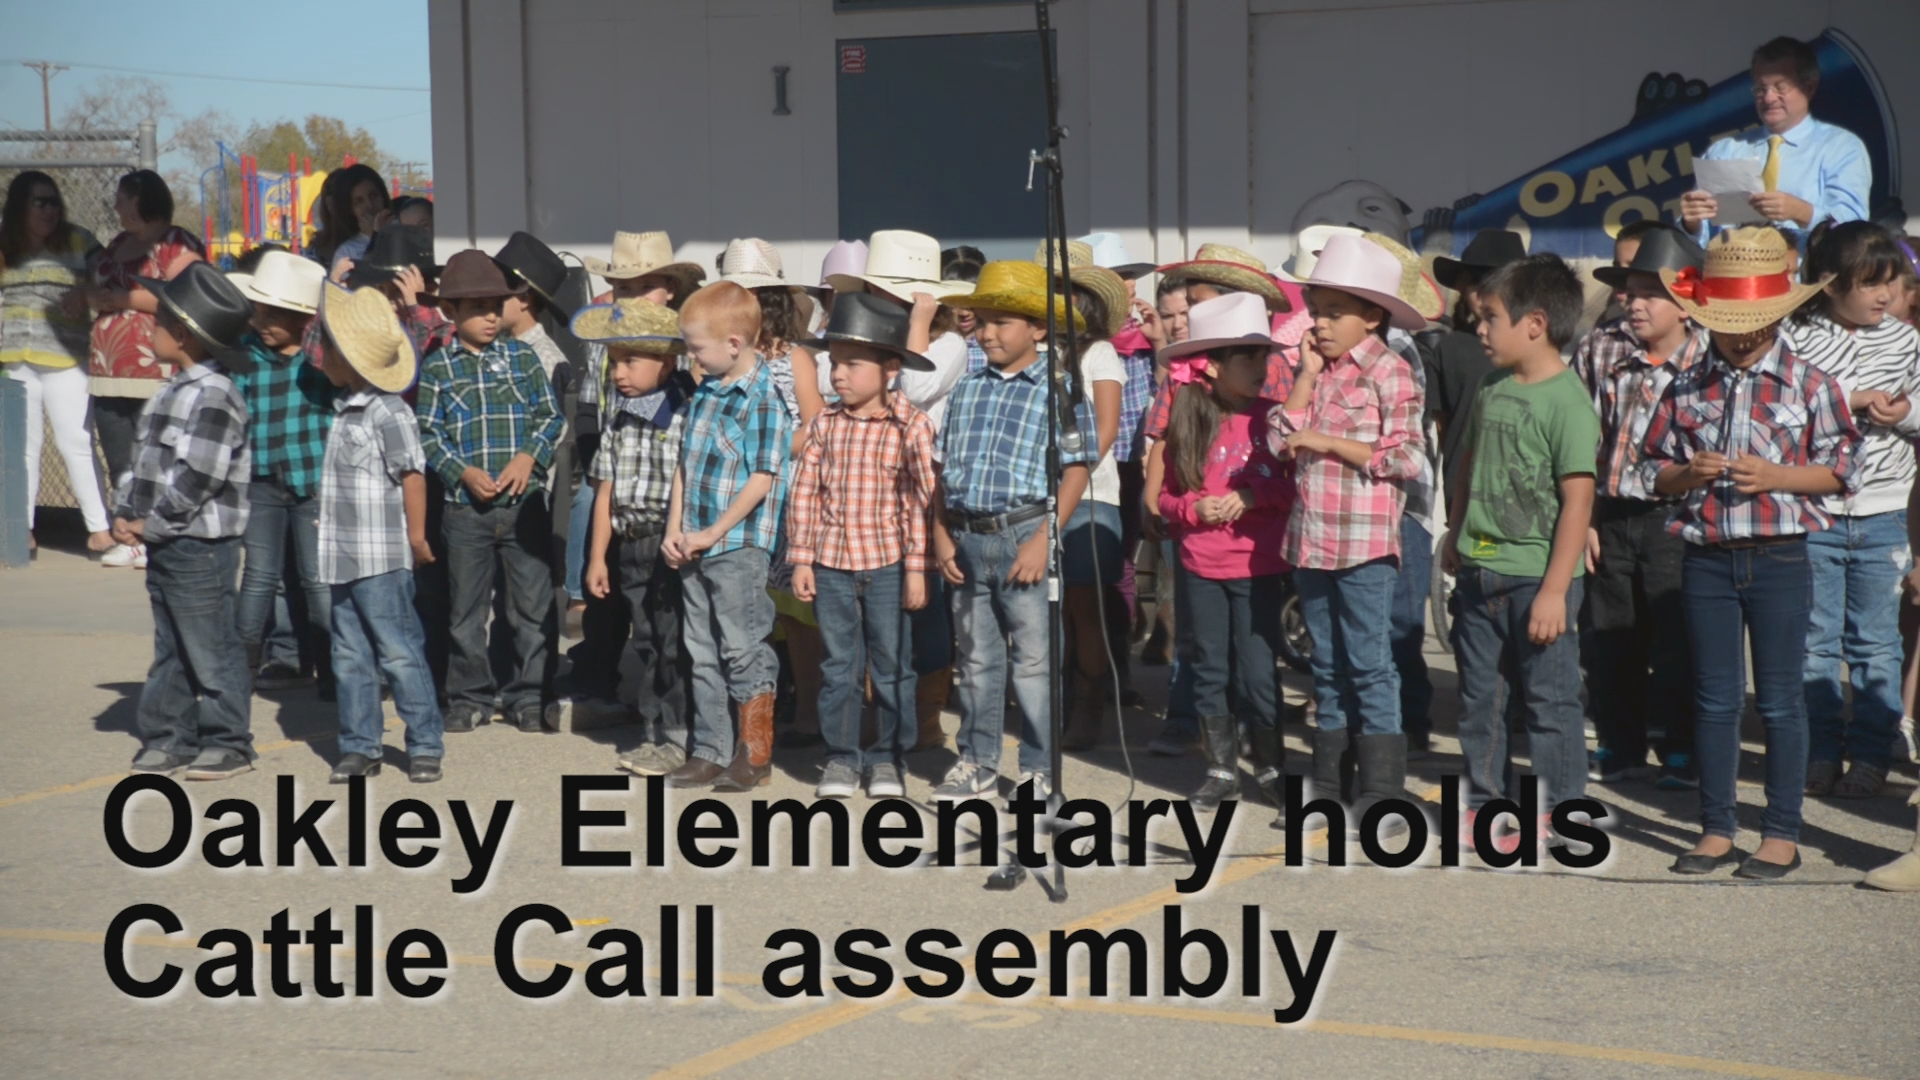 VIDEO: J. W. Oakley Elementary School holds annual Cattle Call Assembly |  Cattle Call 